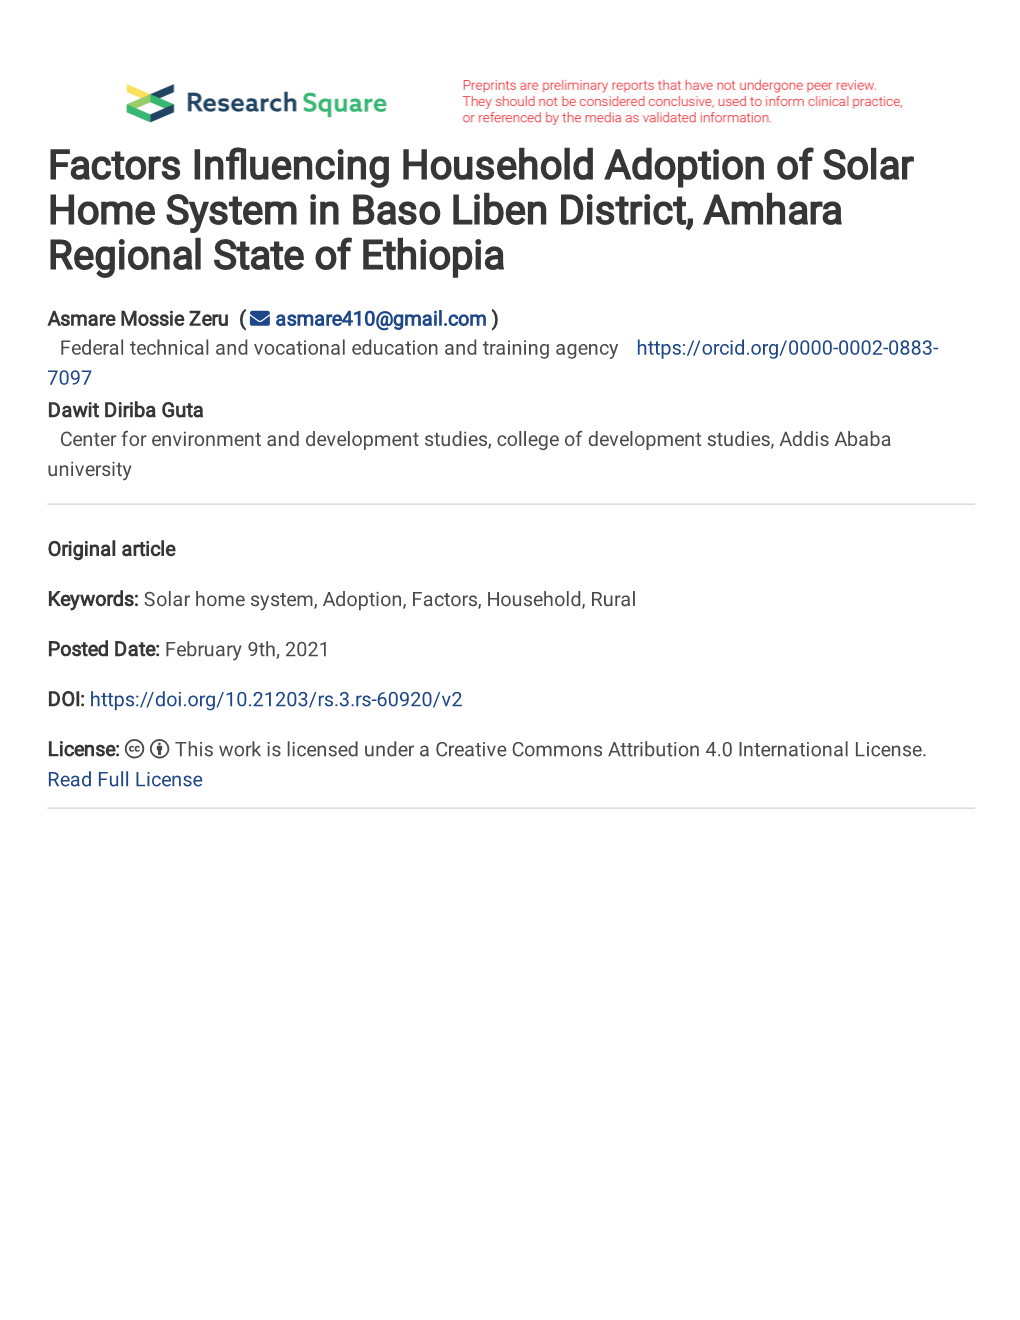 Factors in Uencing Household Adoption of Solar Home System In